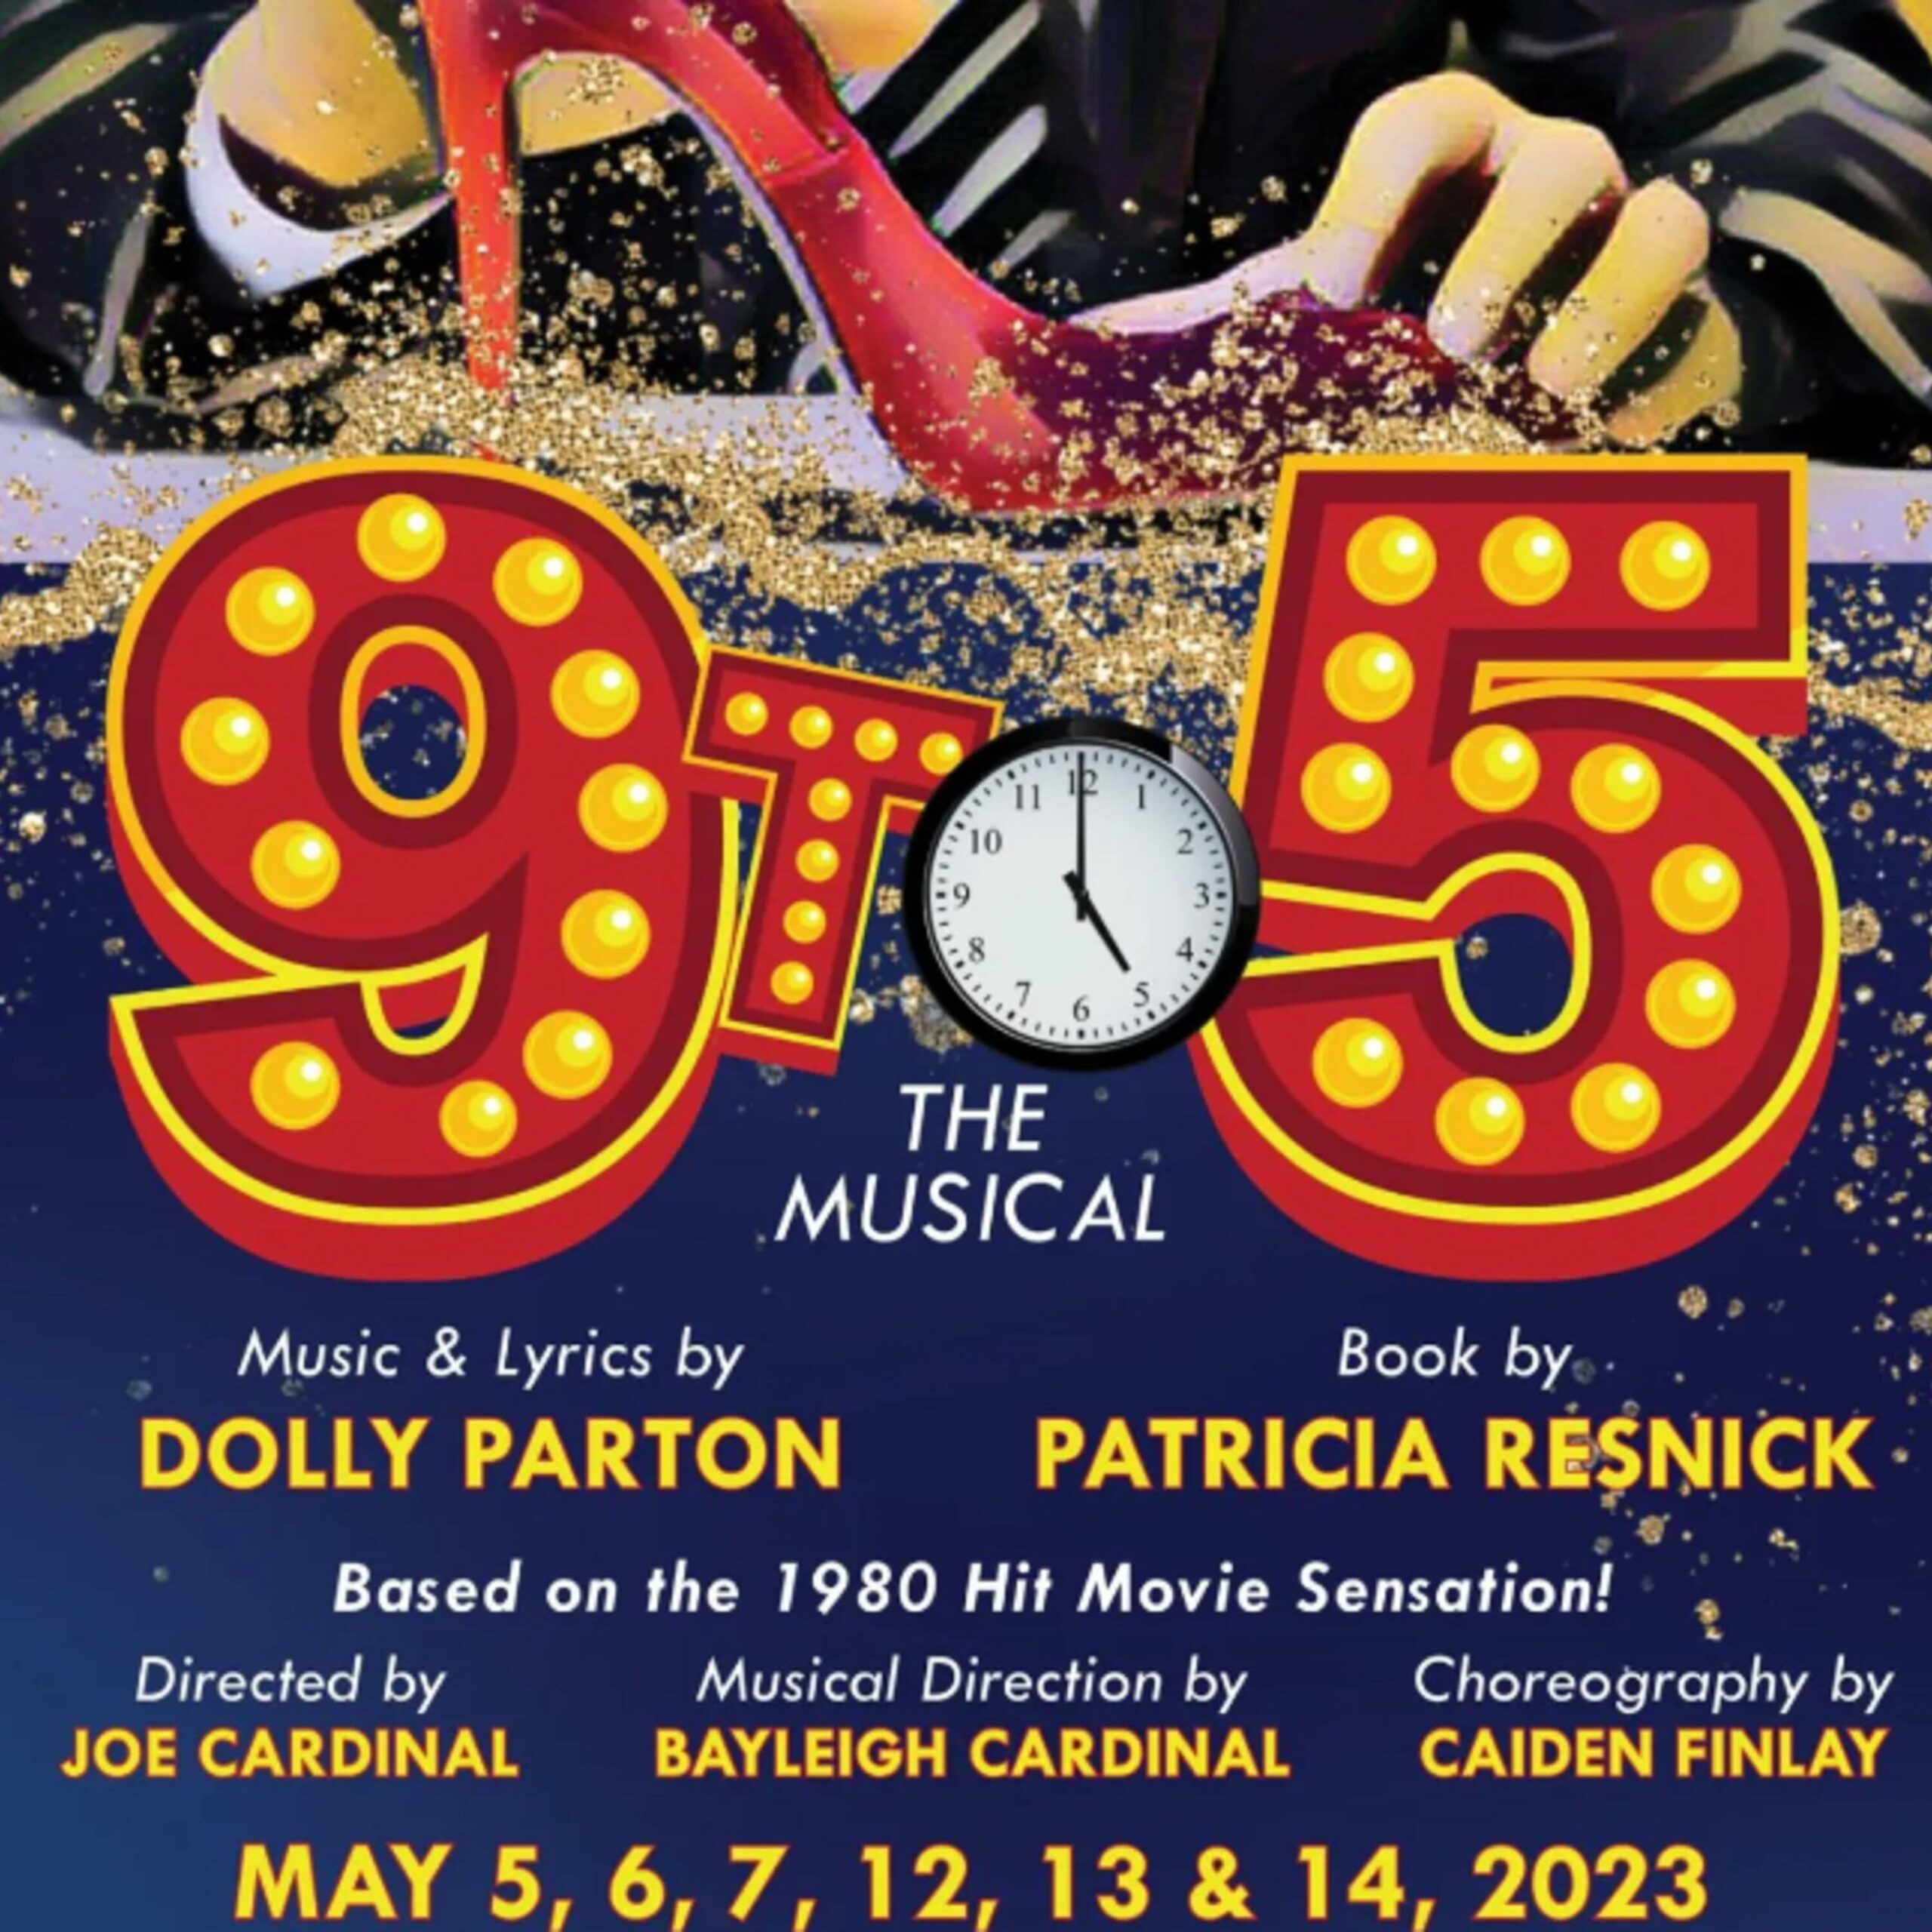 9 to 5: THE MUSICAL